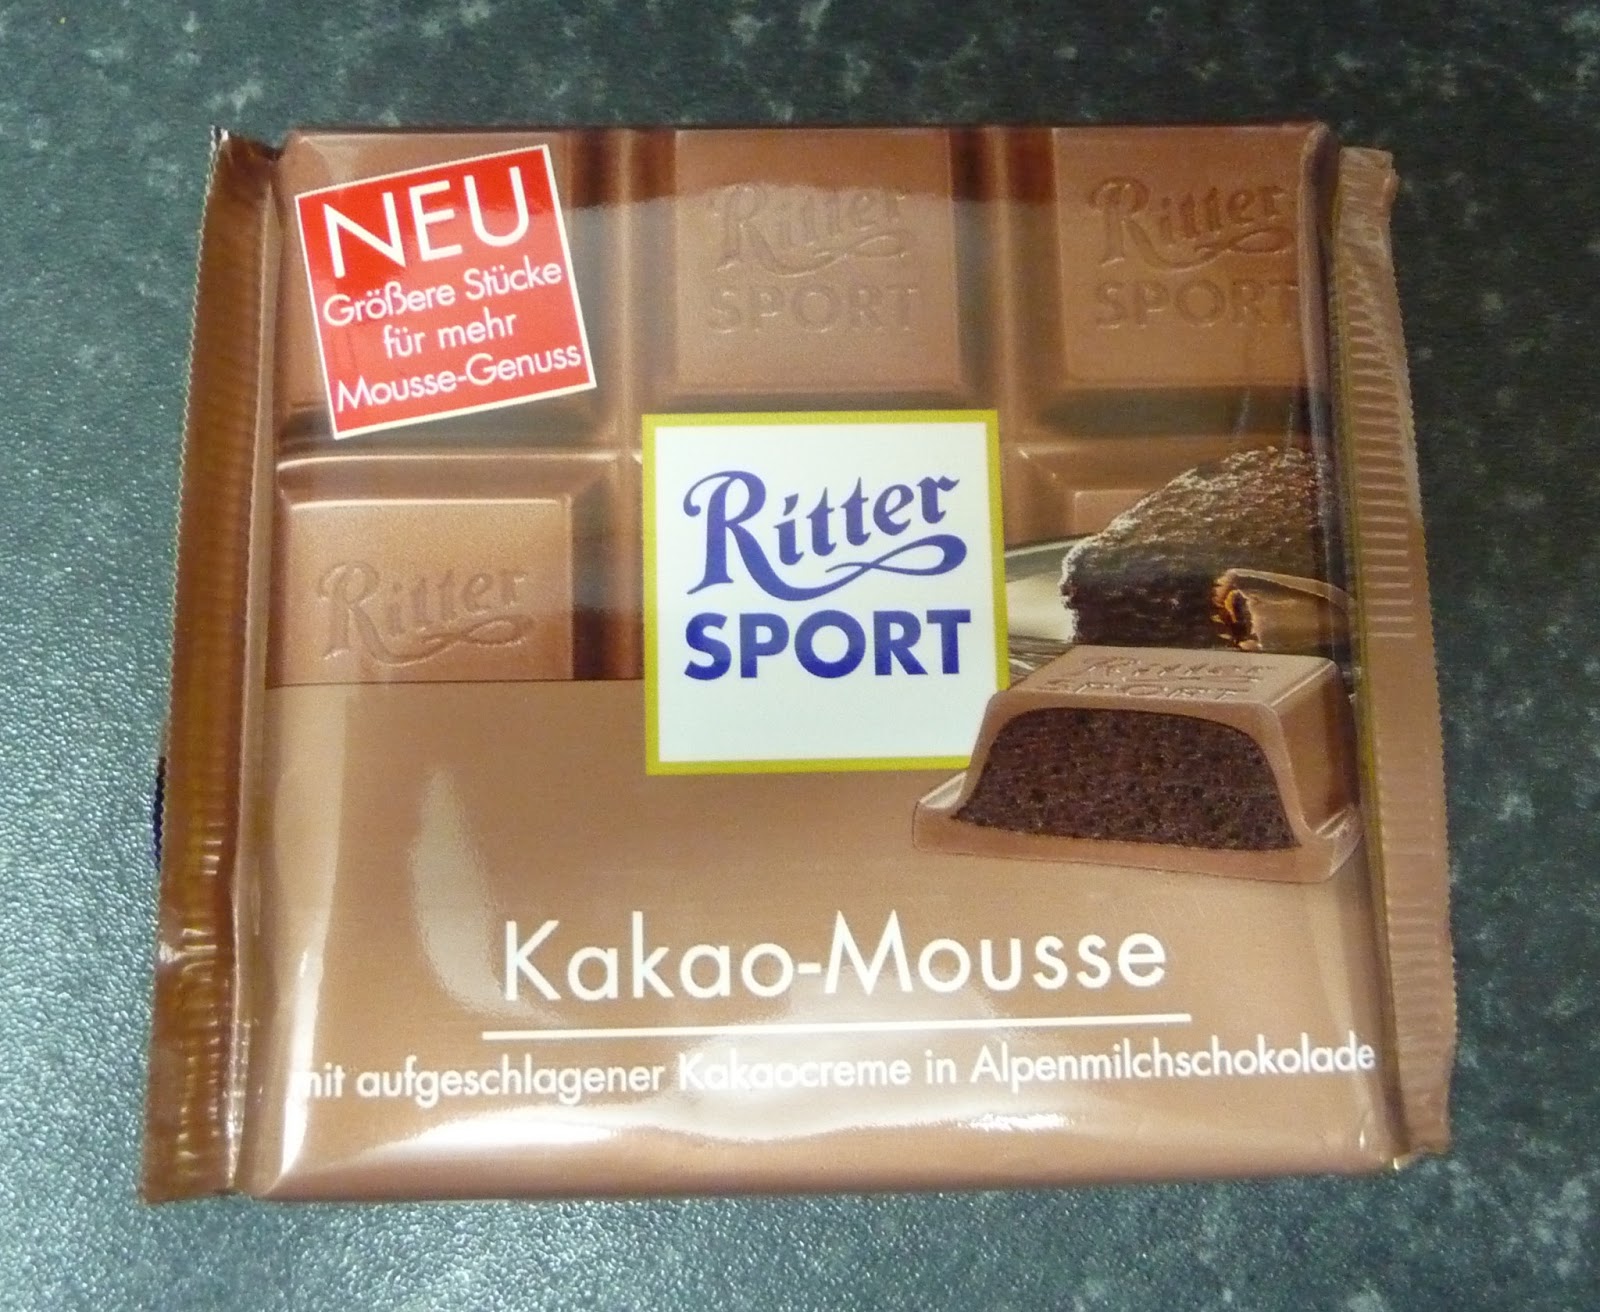 Something to look forward to: Ritter Sport Kakao-Mousse